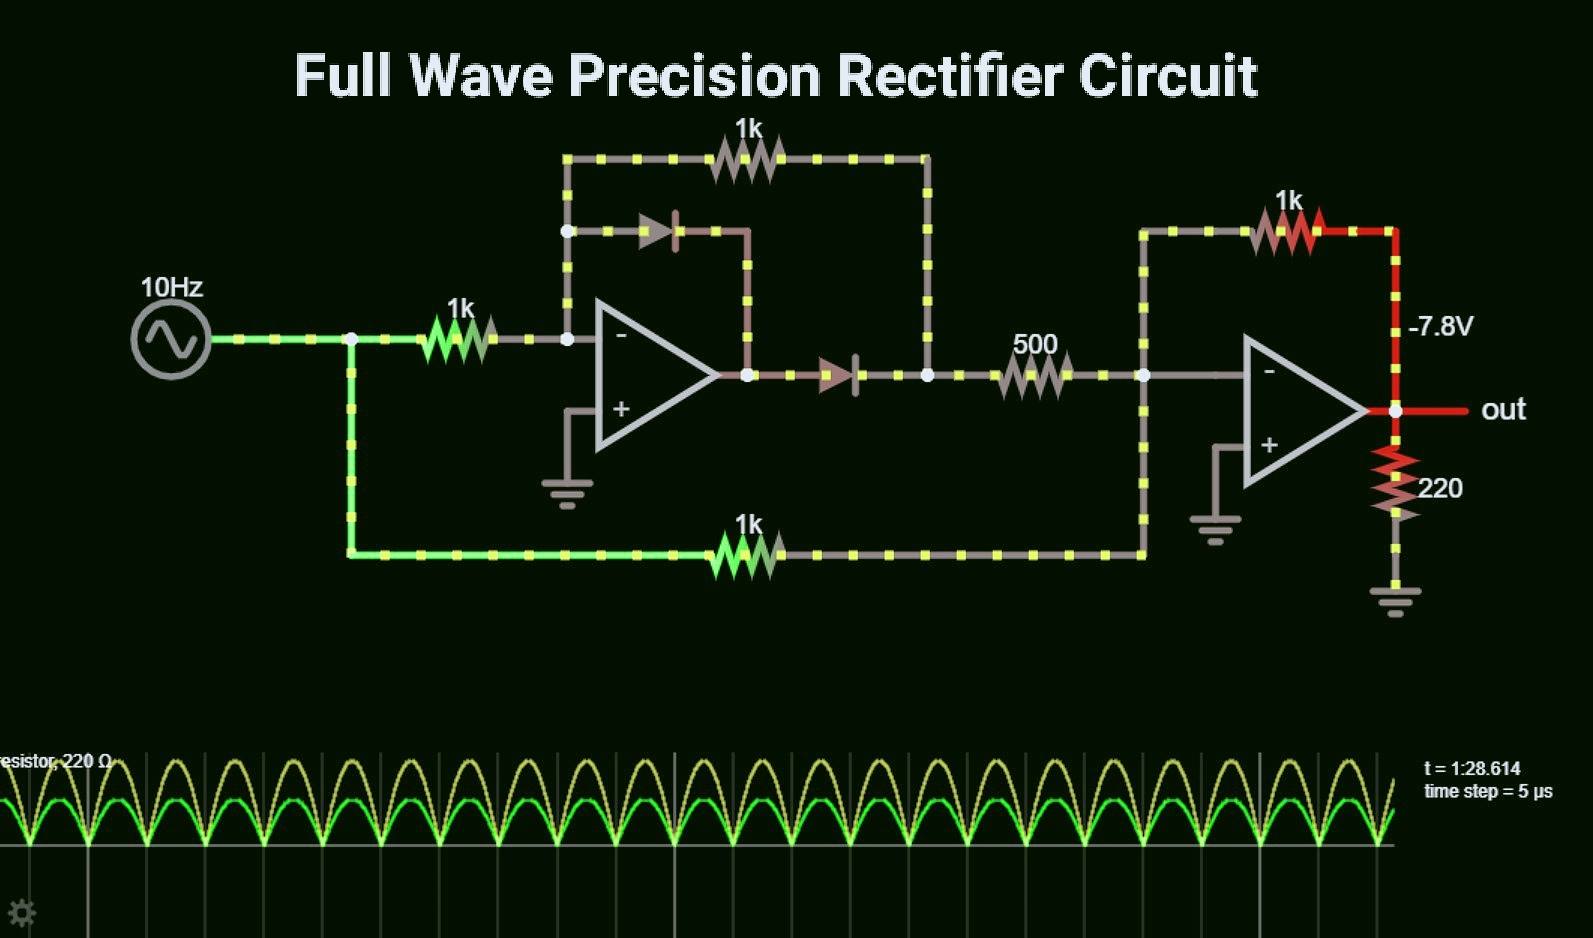 Full wave precision rectifier circuit